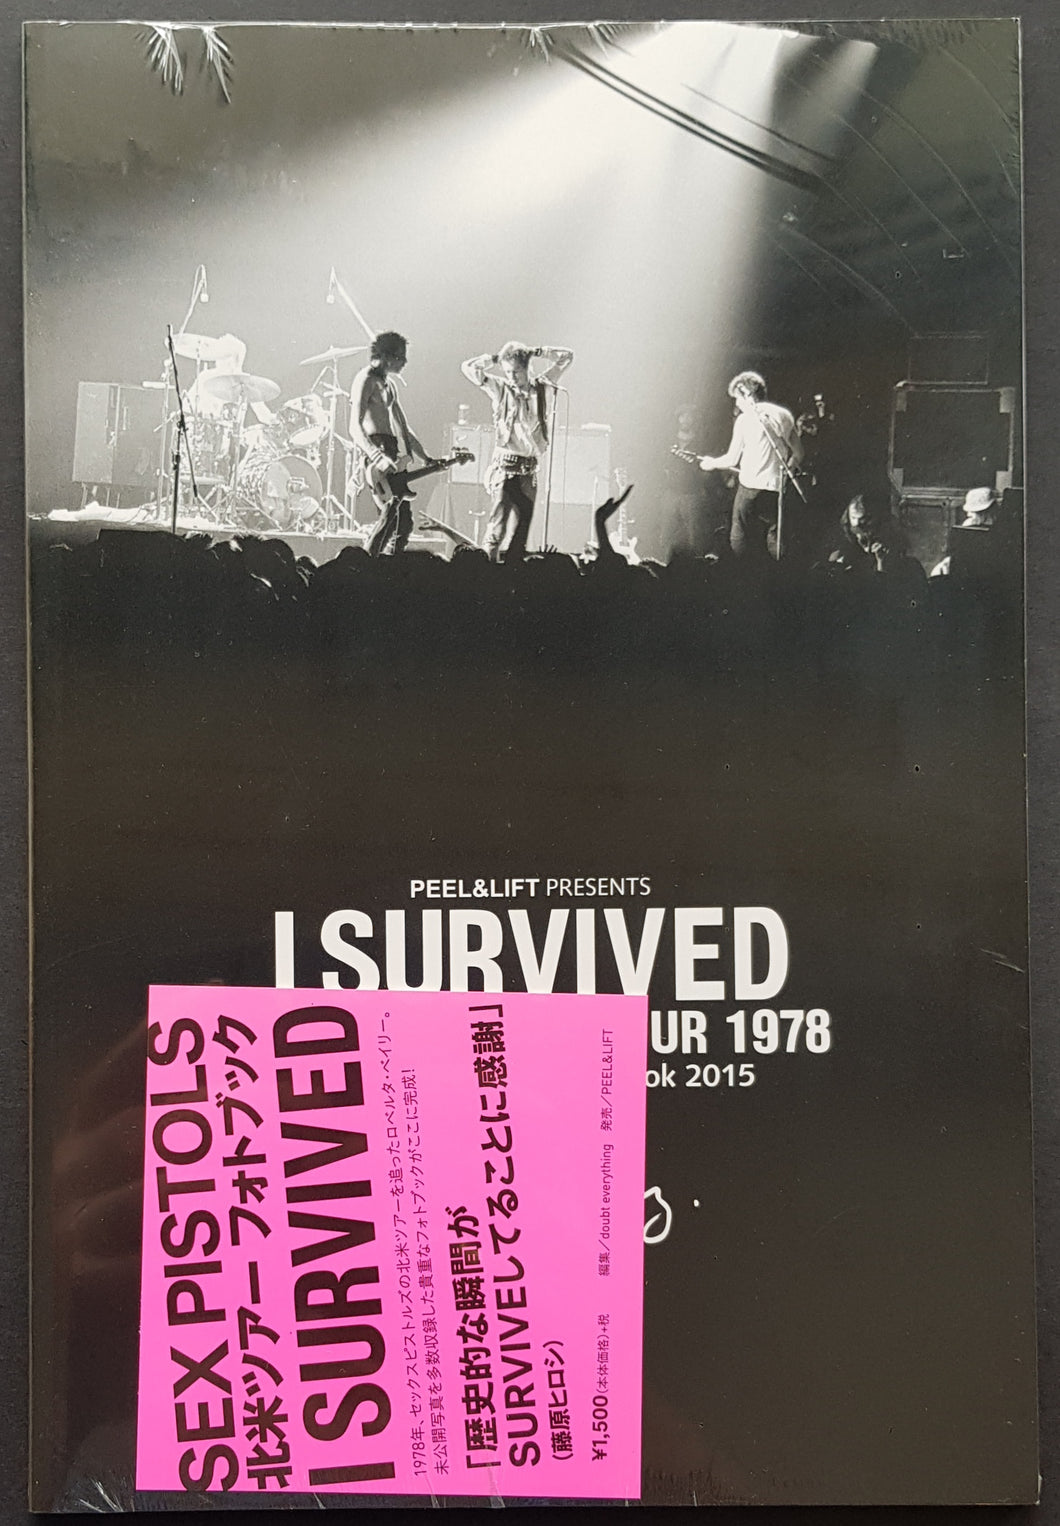 Sex Pistols - I Survived First American Tour 1978